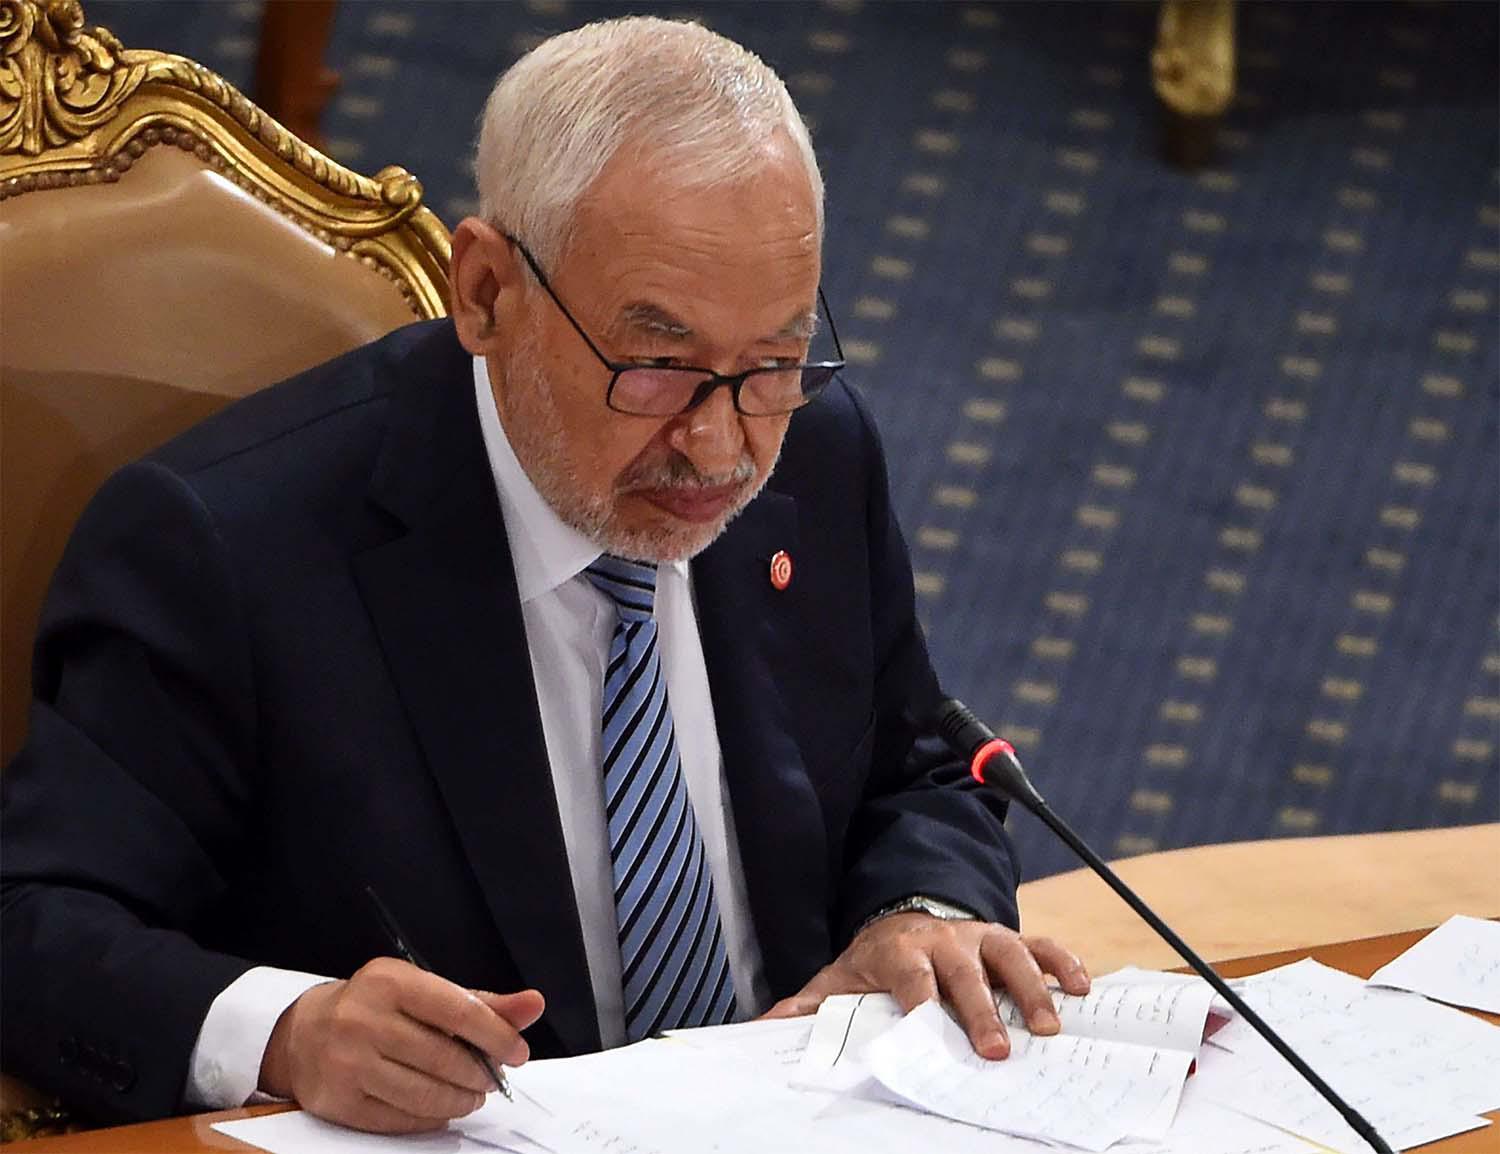 Rached Ghannouchi, leader of the Islamist-inspired Ennahdha party